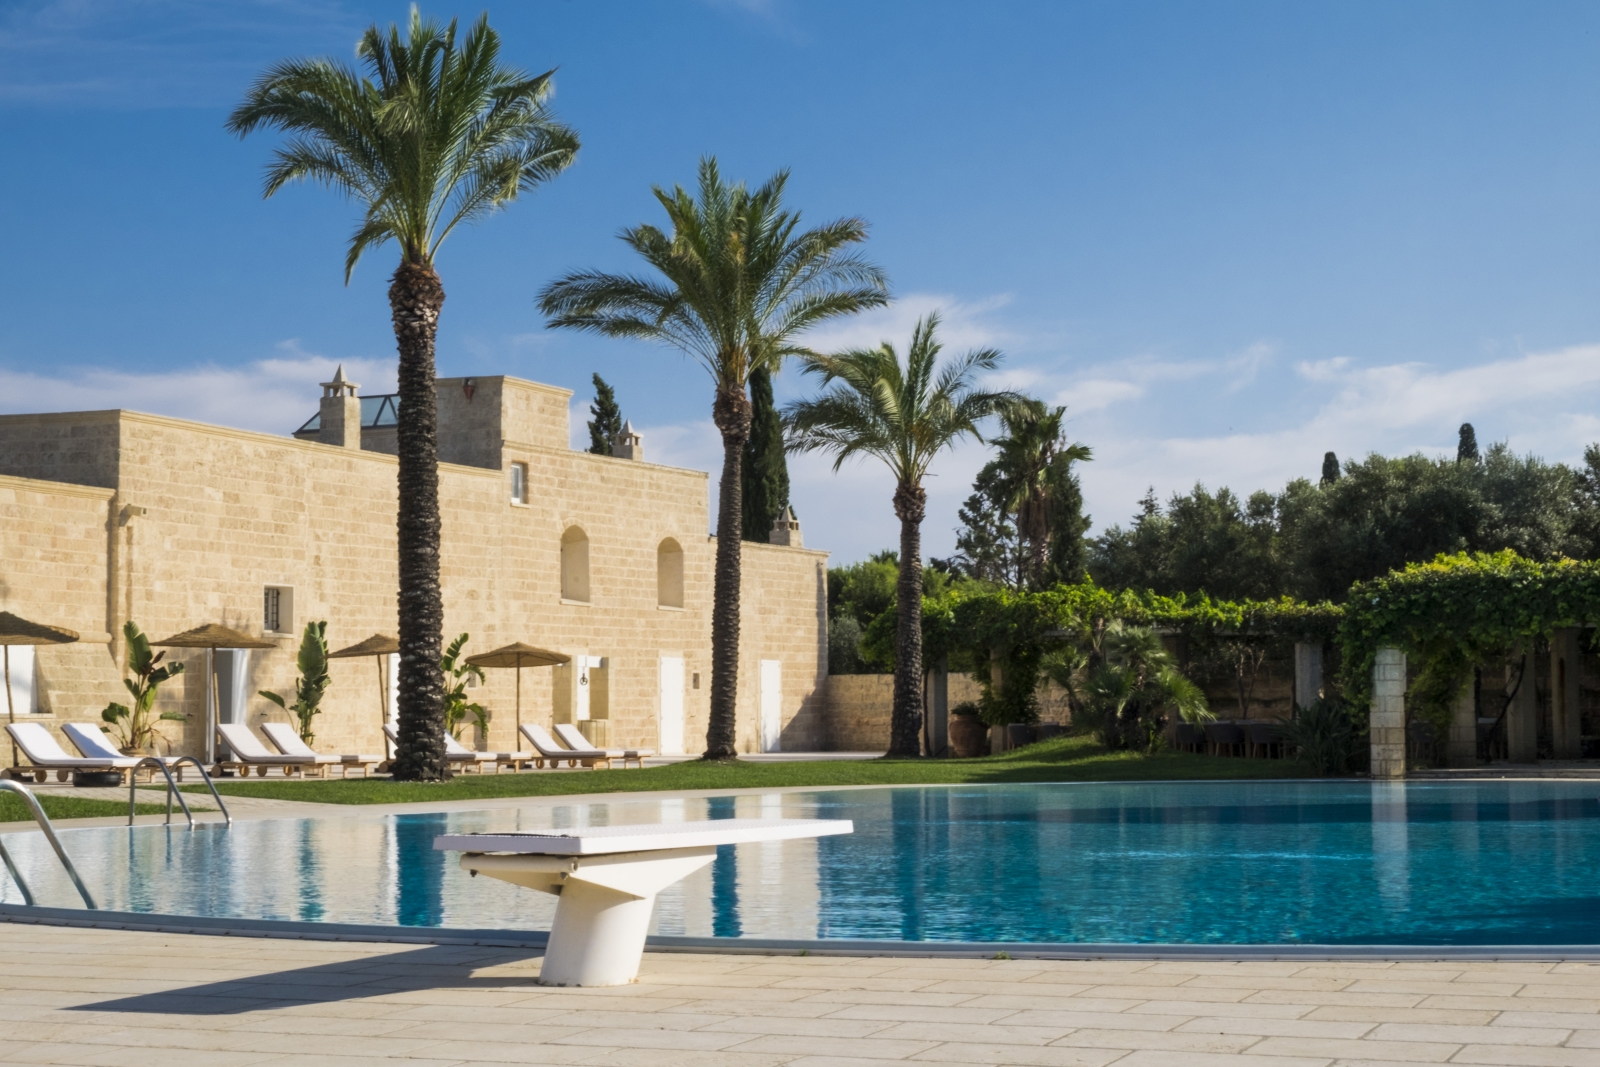 Pool with diving board and patio area with sun loungers, umbrellas and palm trees at Masseria dei Papi in Puglia, Italy